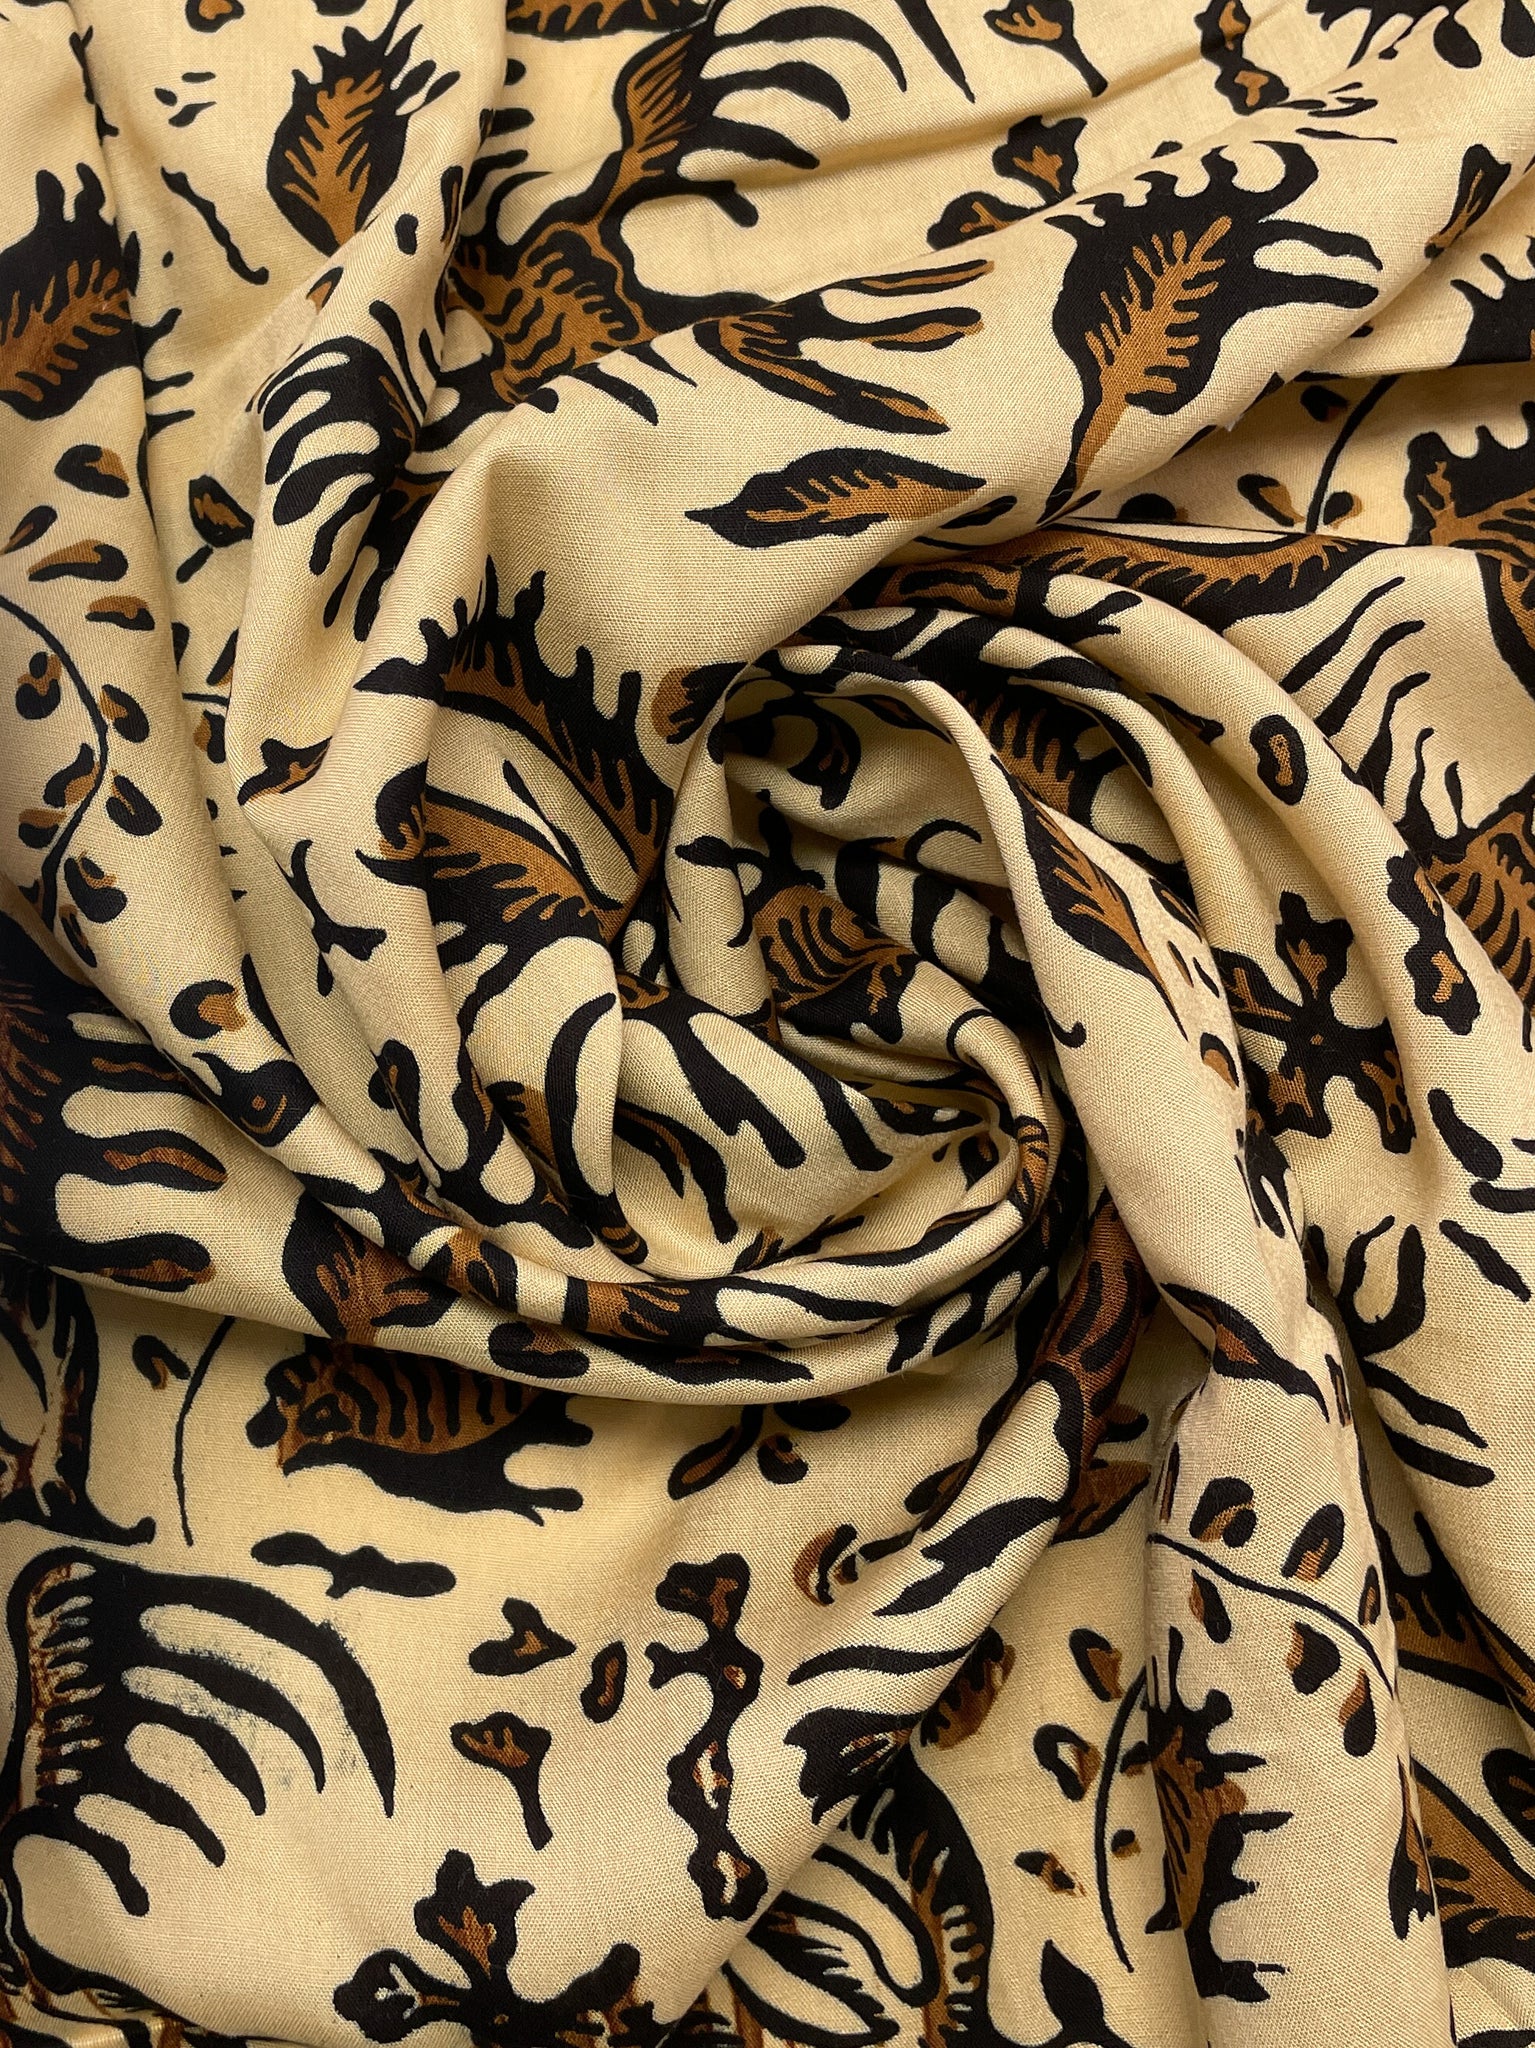 2 YD Rayon - Beige Yellow with Brown and Black Designs and Border